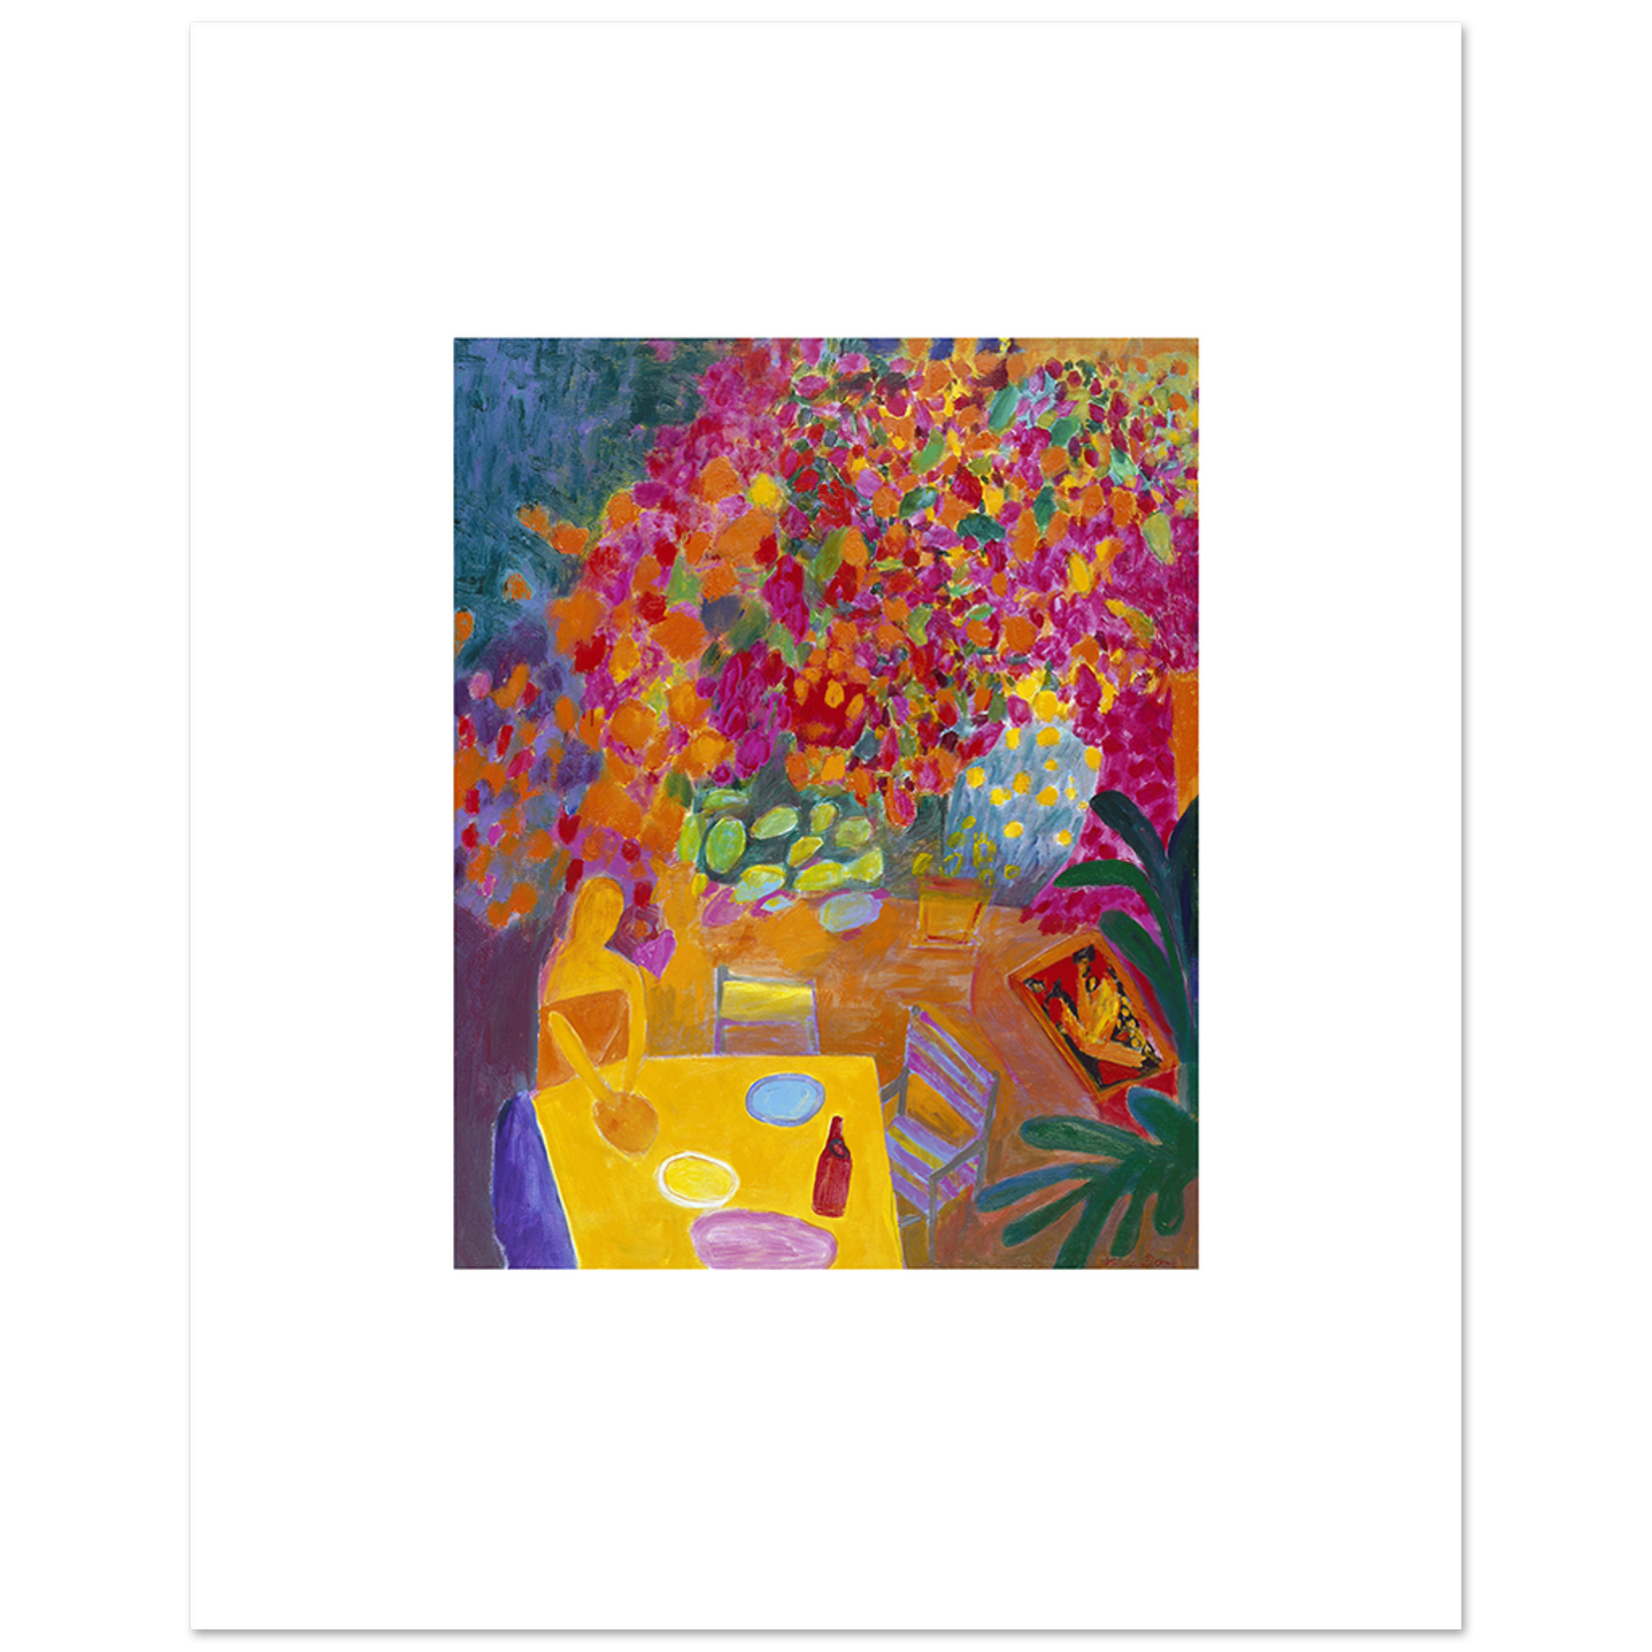 Limited Edition Prints Bougainvillea barbeque, 2000